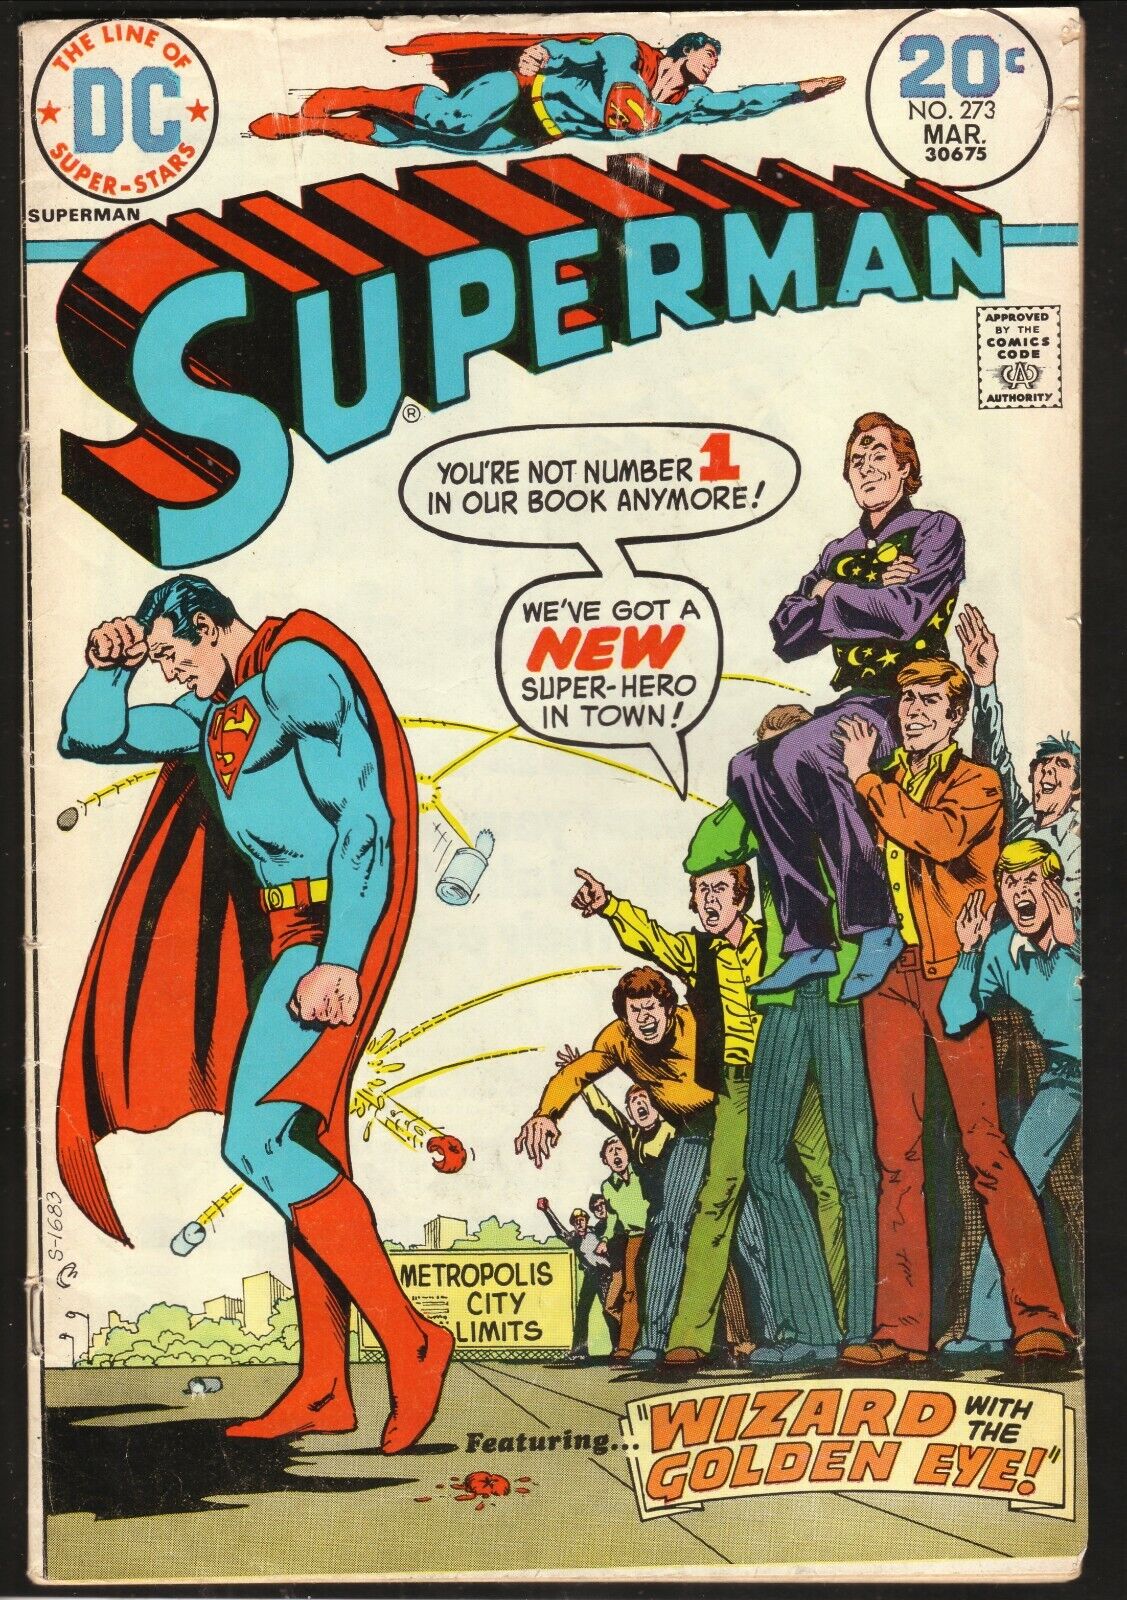 Superman #273--The Wizard with the Golden Eye--1974 DC Comic Book